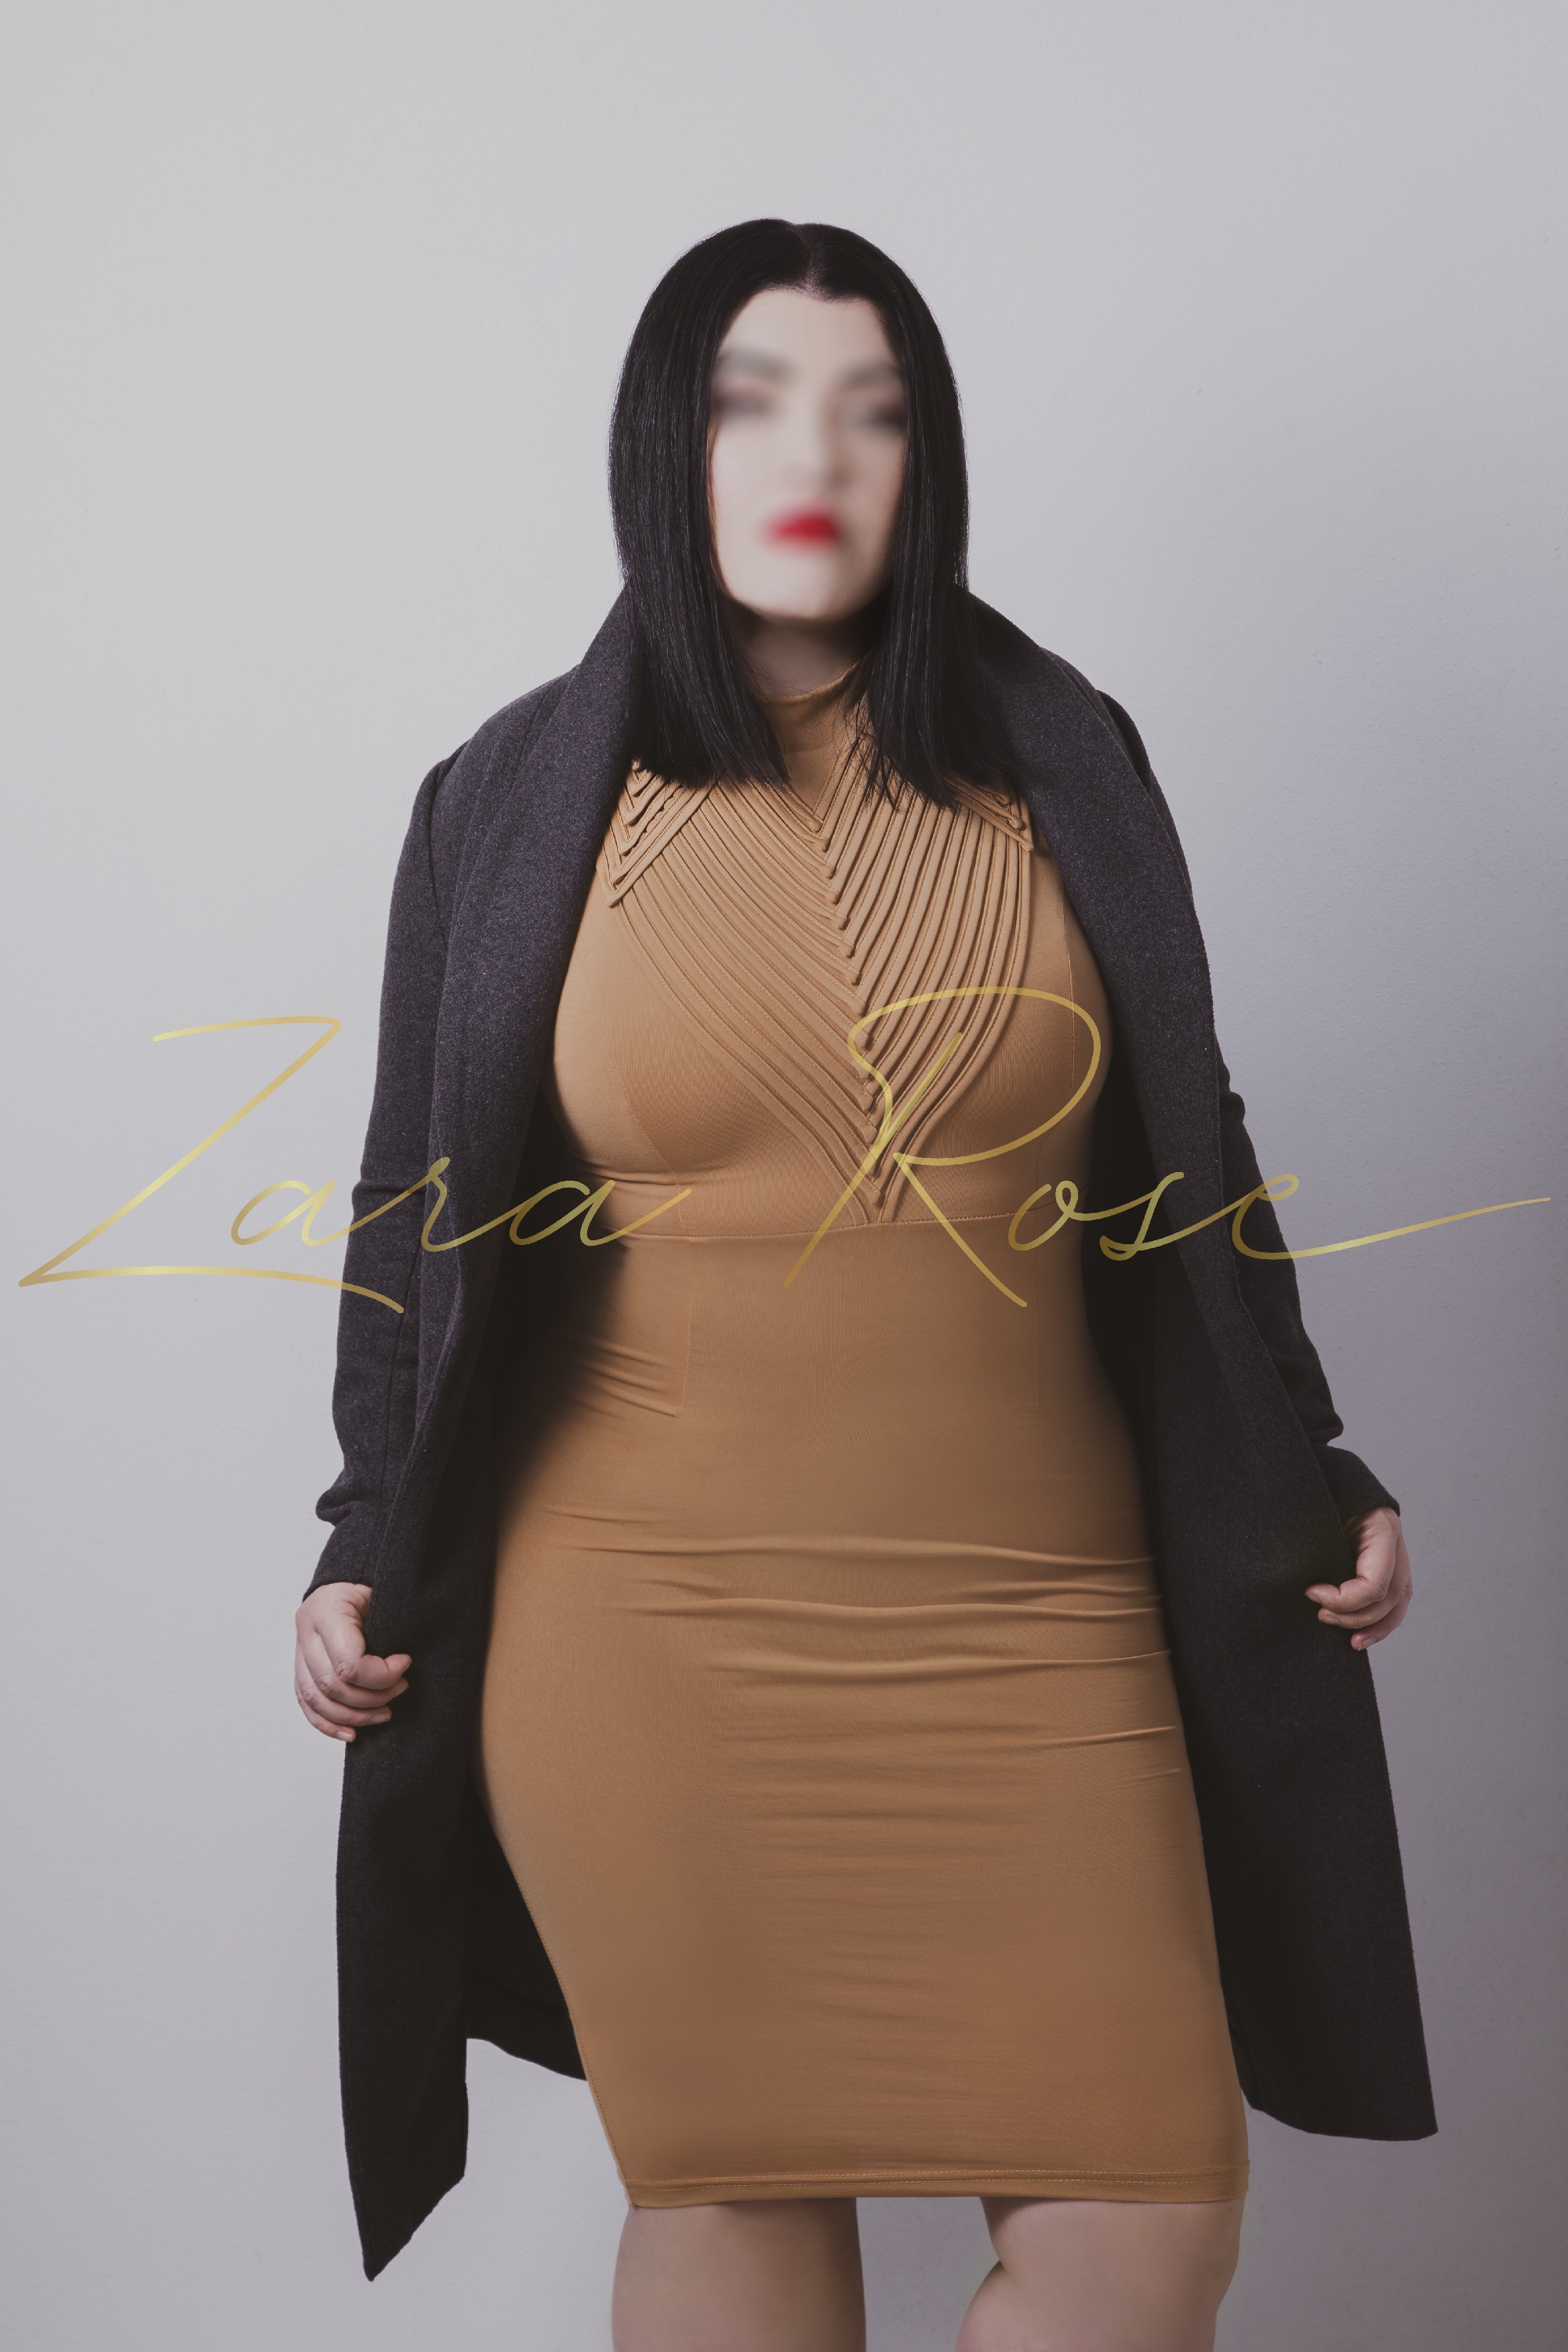 Zara Rose Verified Brisbane Escort Available Angels Available Angels